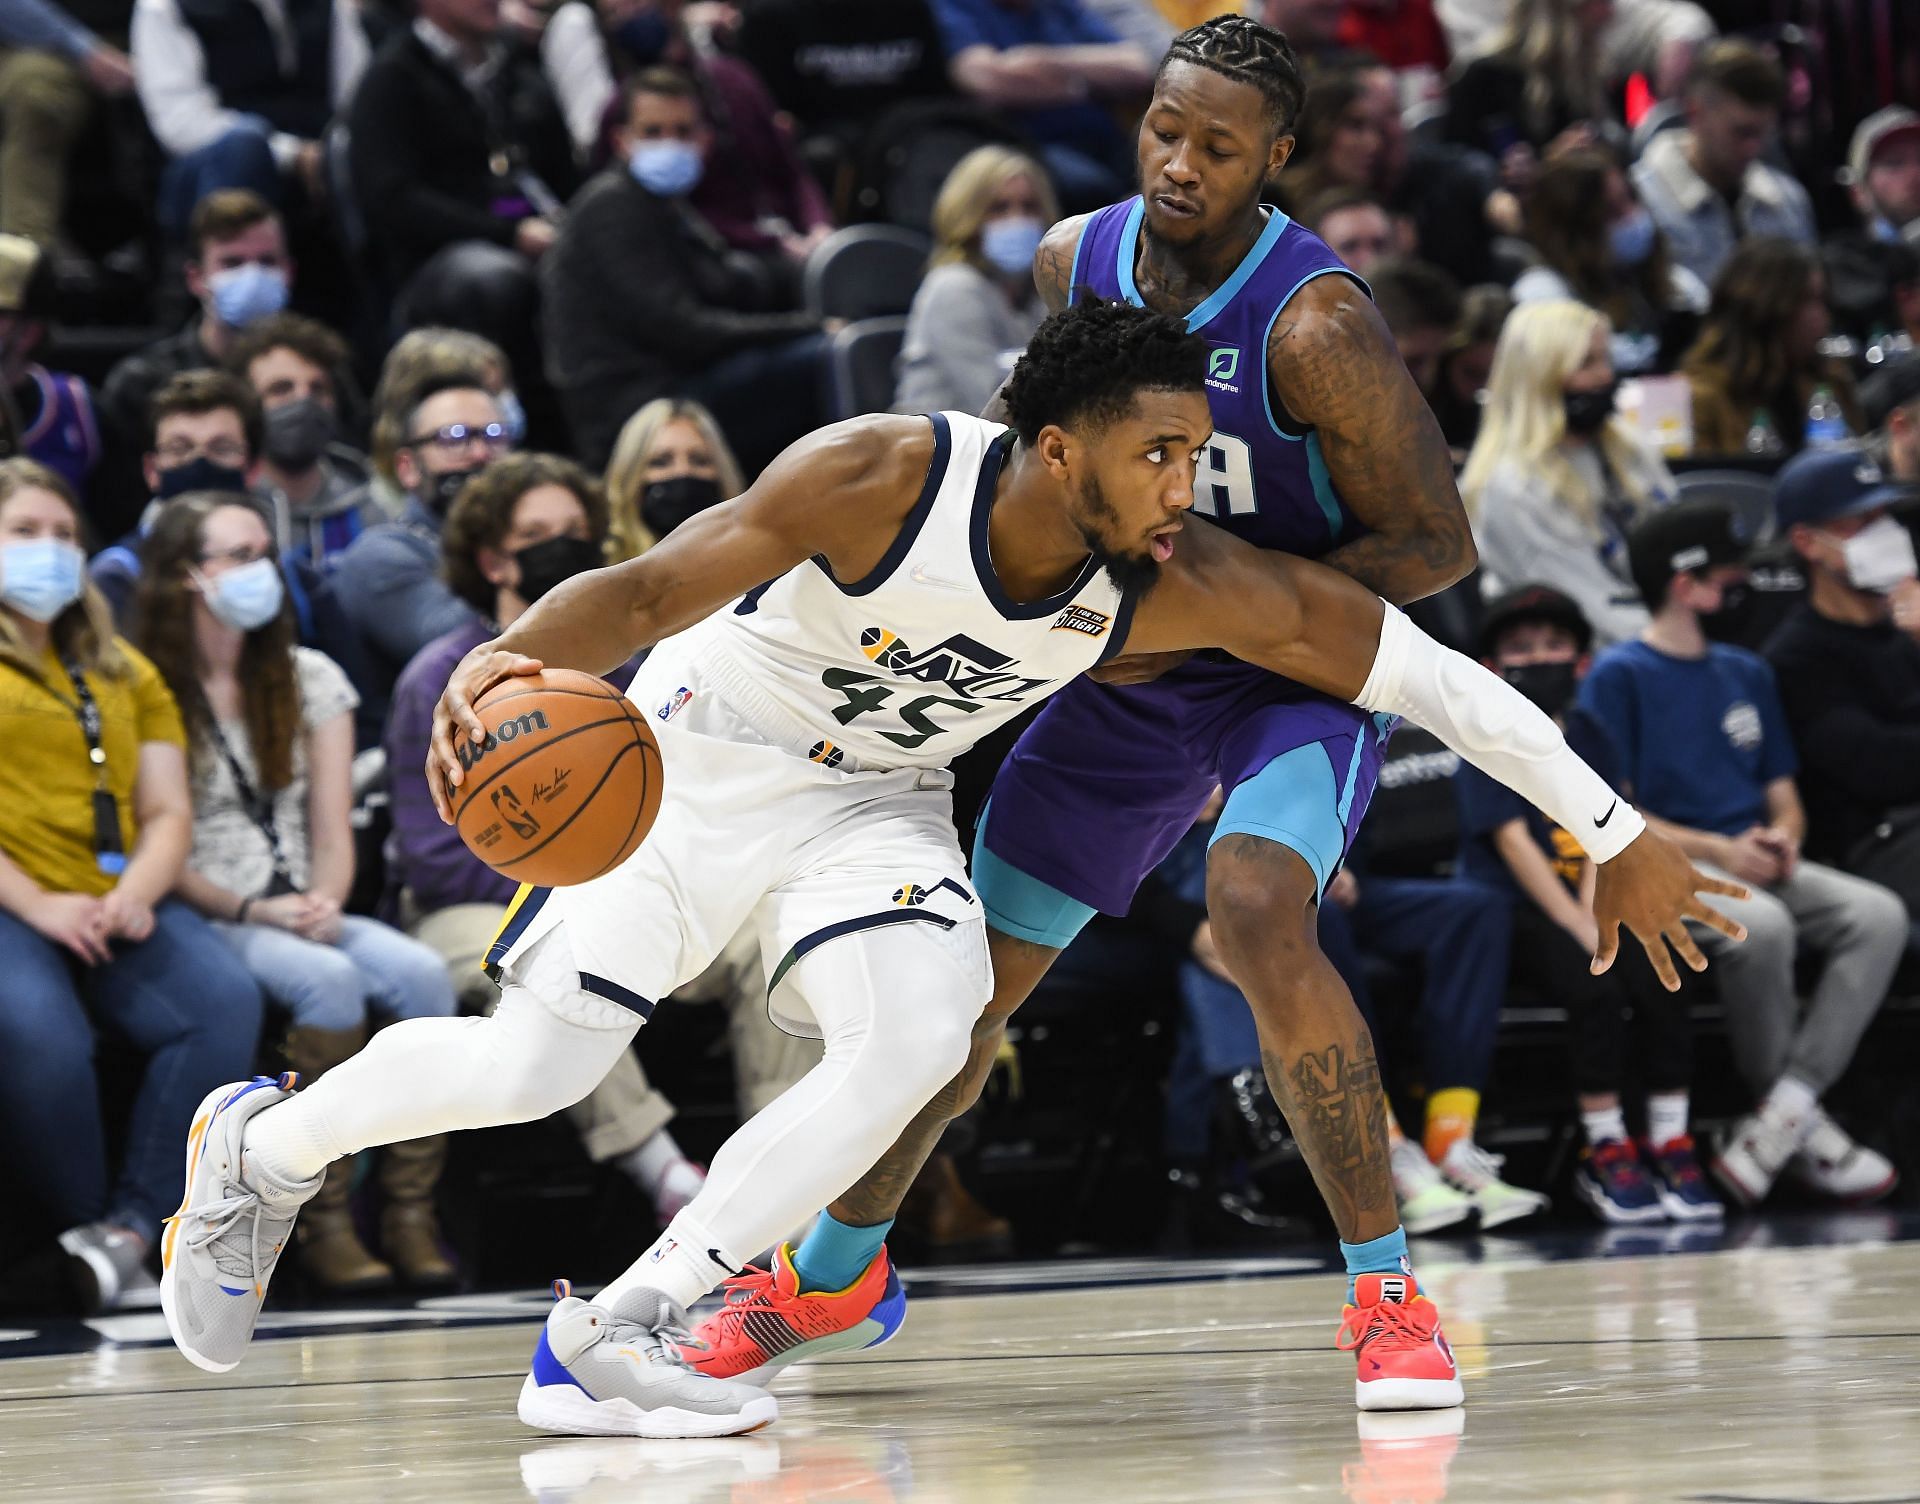 Charlotte Hornets lost 102-112 to the Utah Jazz on Monday.